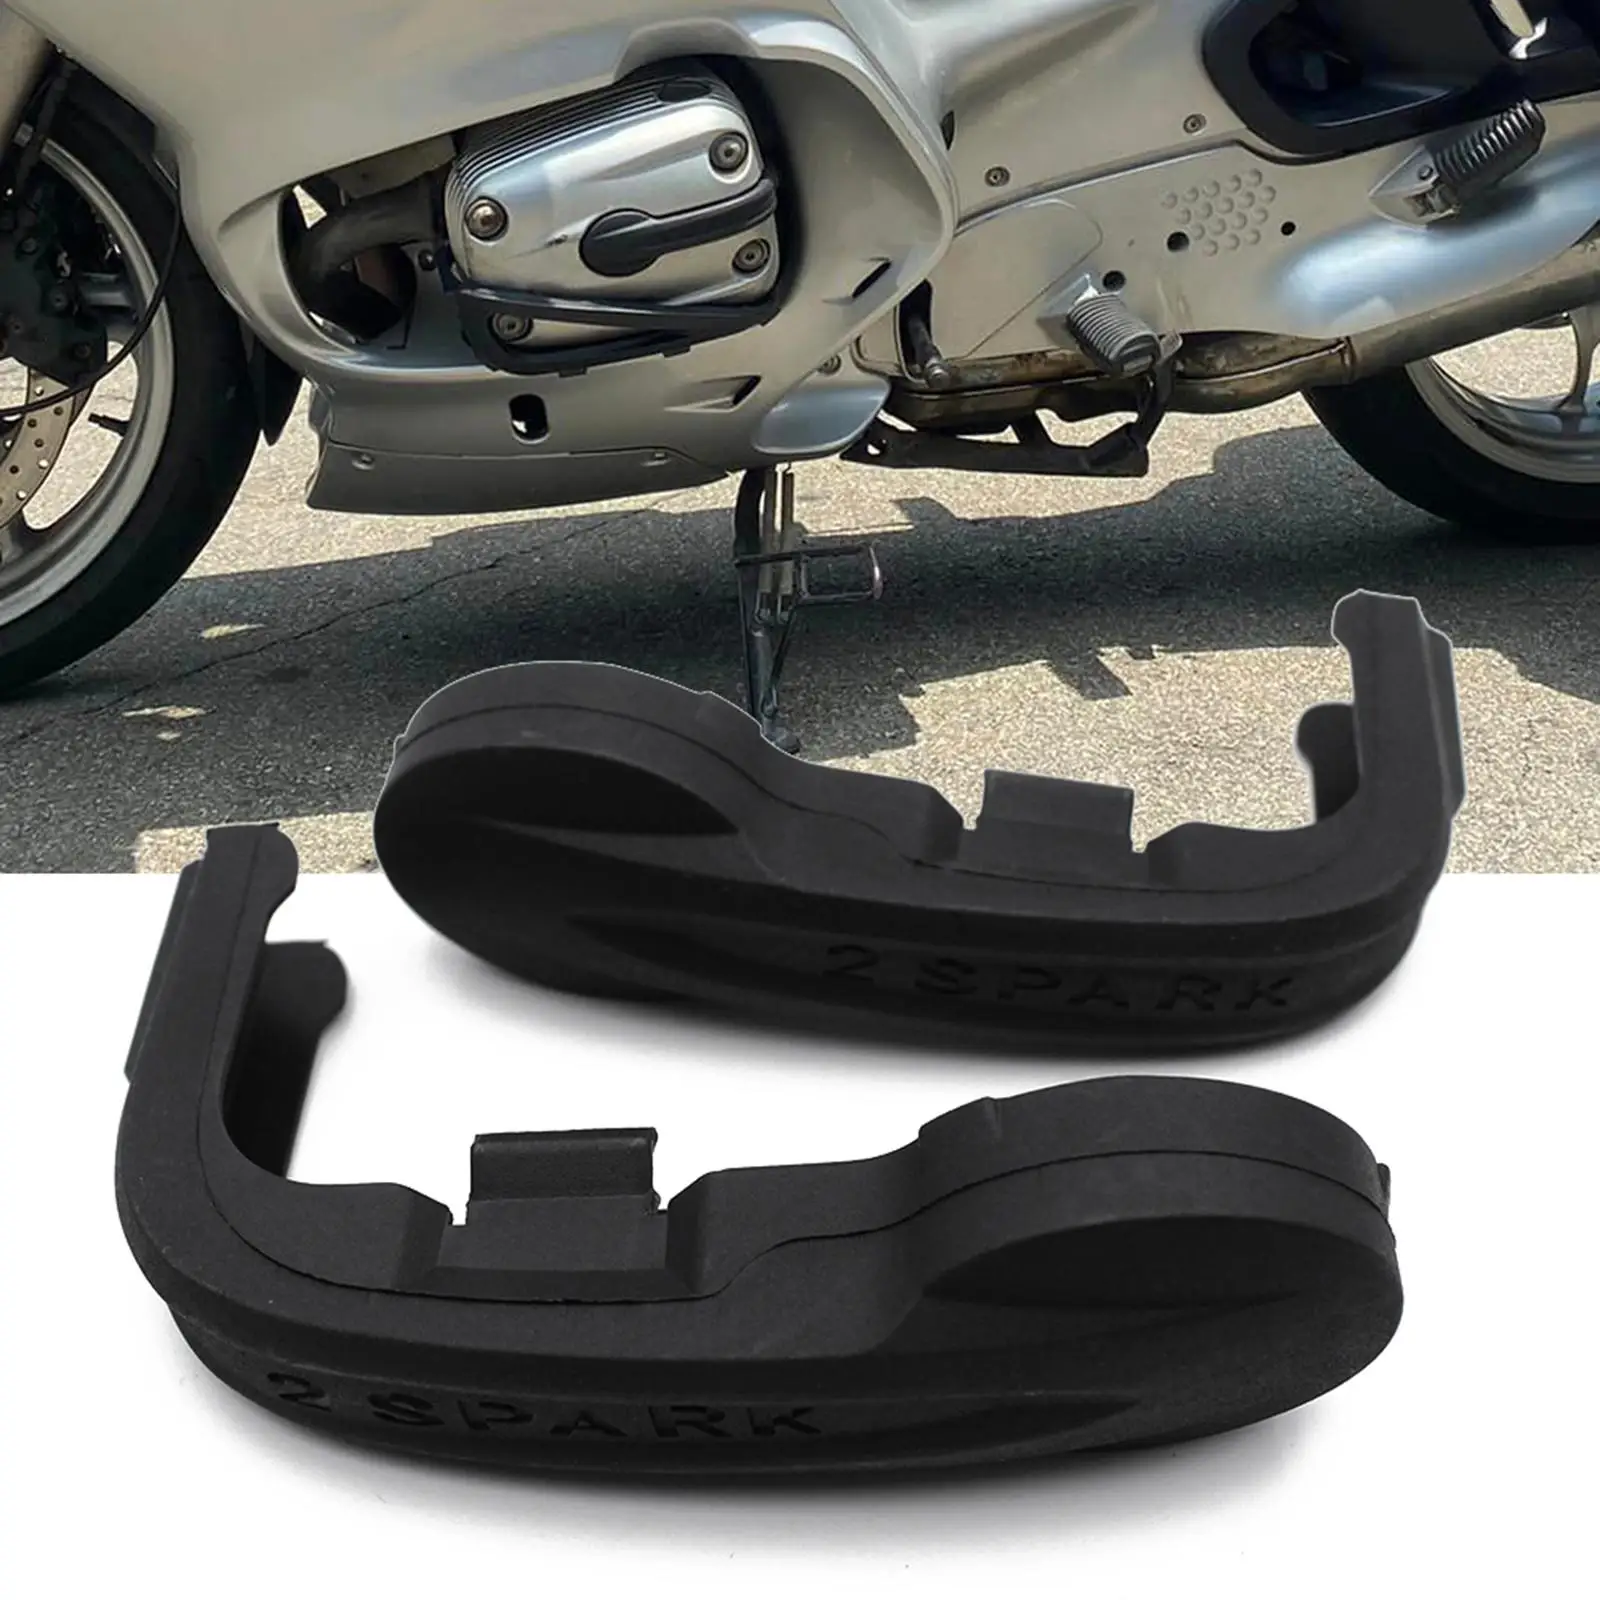 2x Ignition Spark Plug Cover Guard Easy Installation Durable for BMW R1150R R1150RS R1150 R RT GS RS Motorbike Accessories